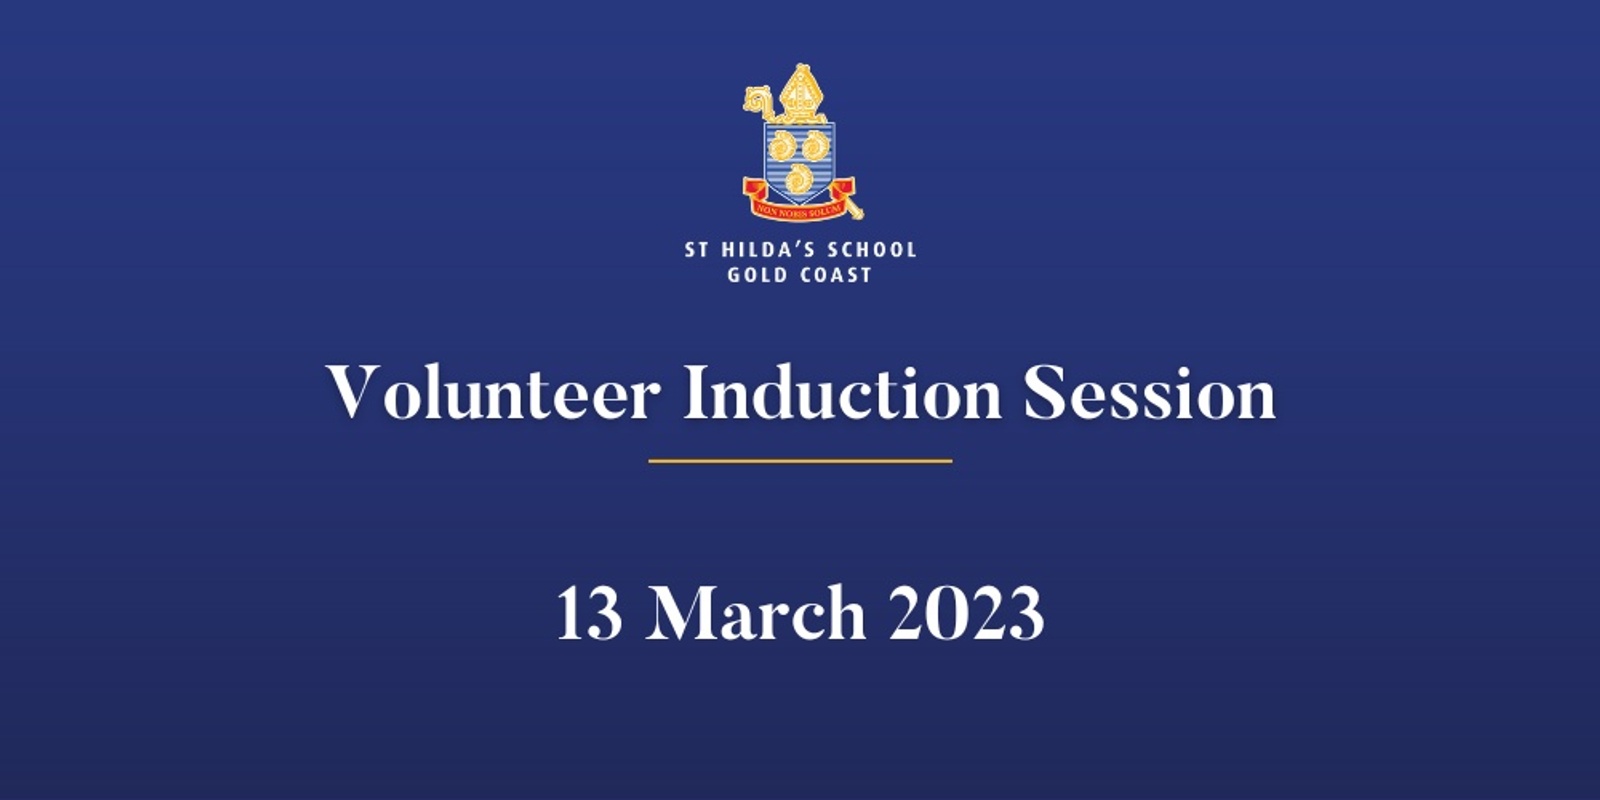 Banner image for Volunteer Induction Session - March 13 2023